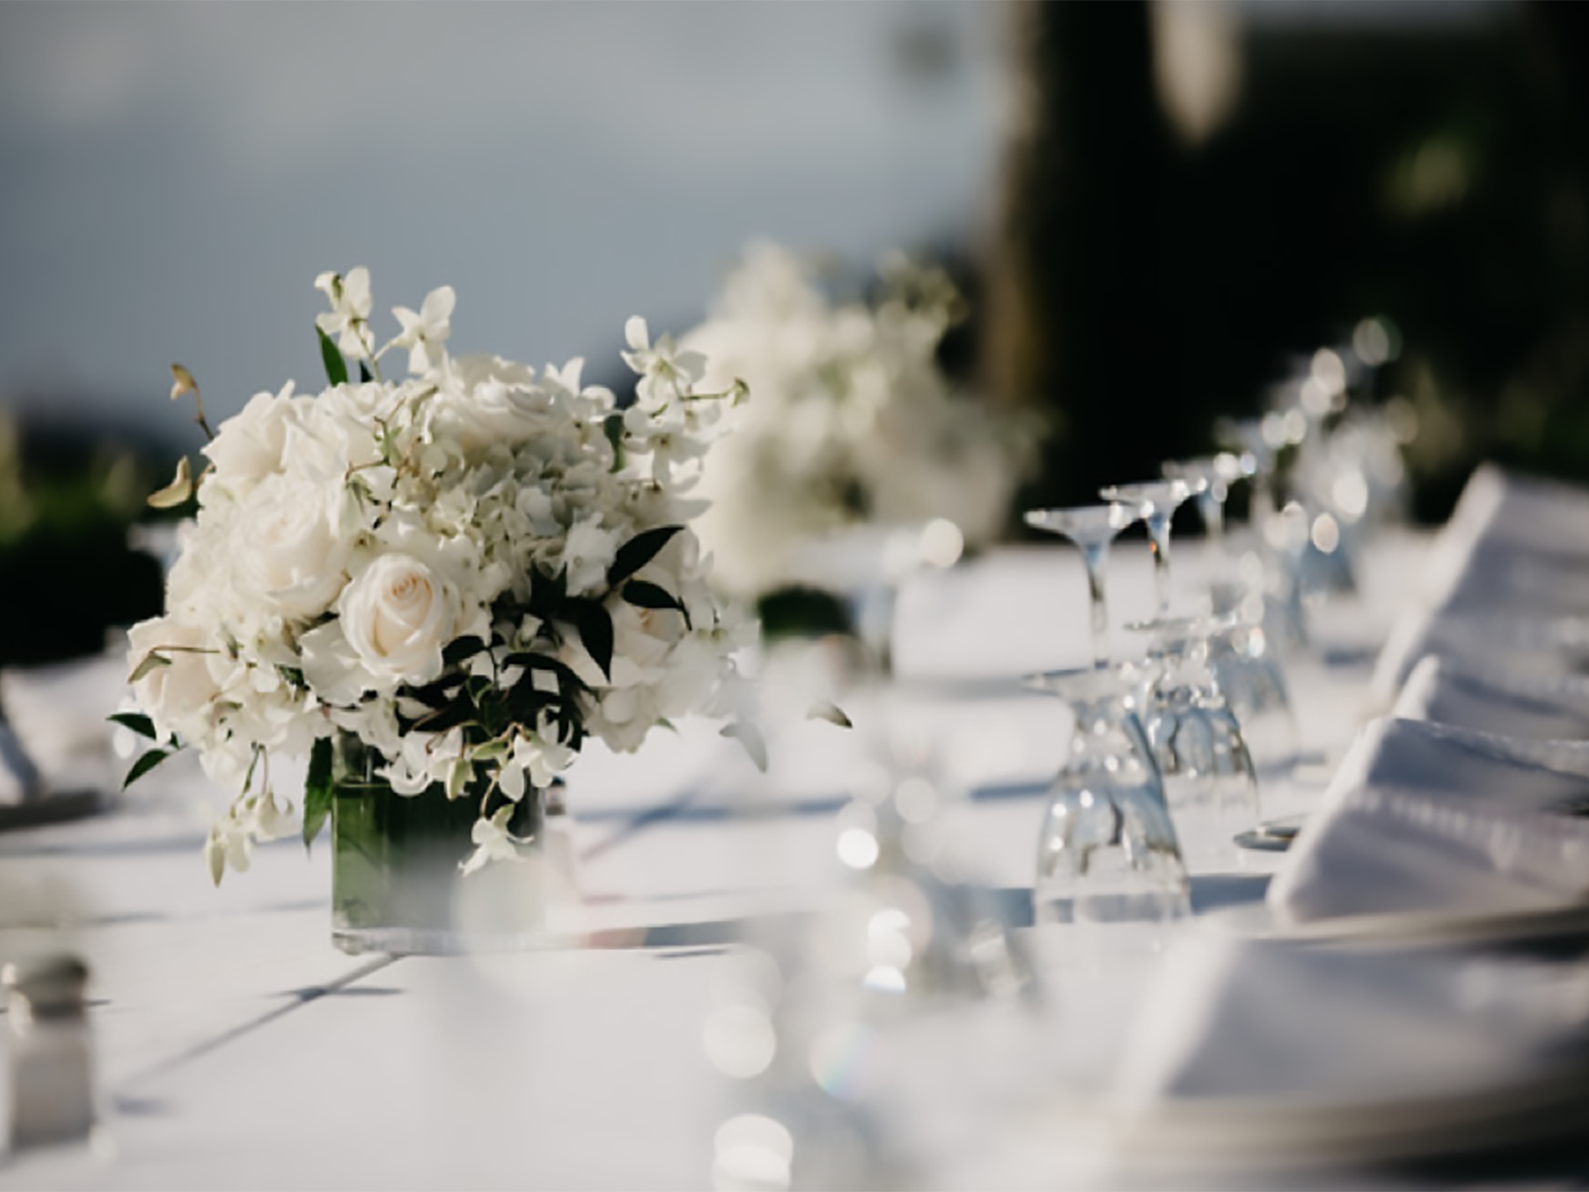 wedding table with glasses and white roses